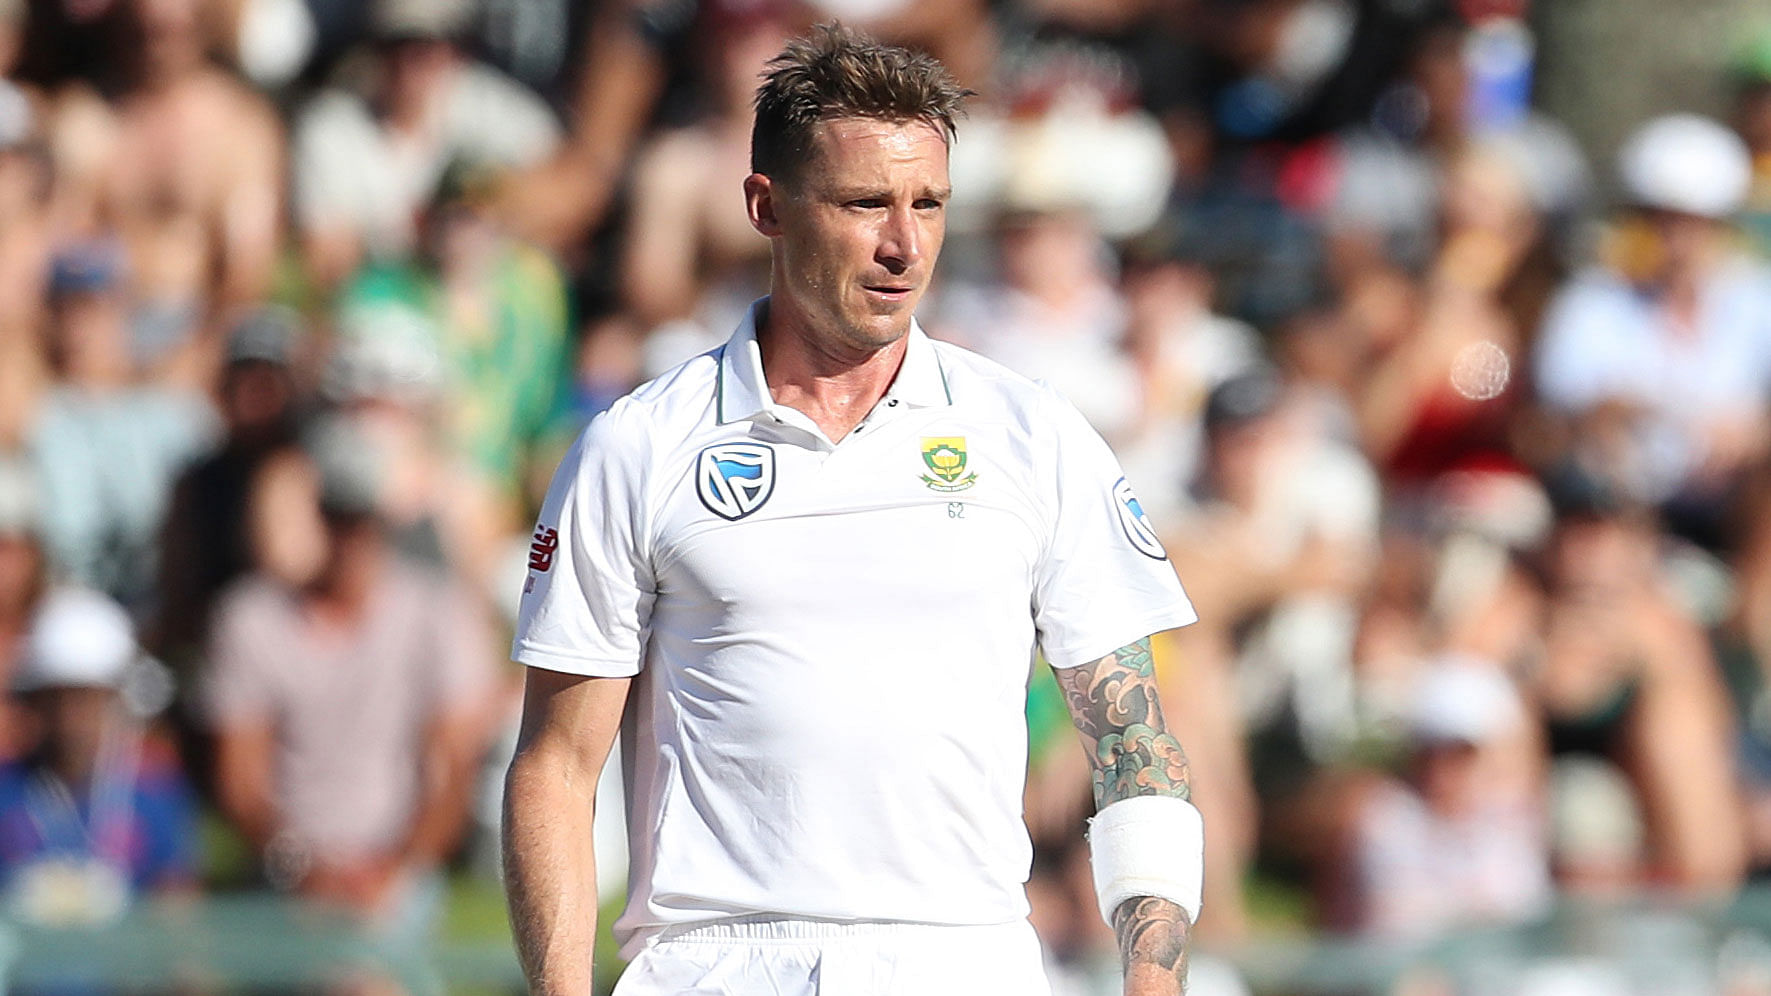 File photo of Dale Steyn who has announced his retirement from Test cricket.